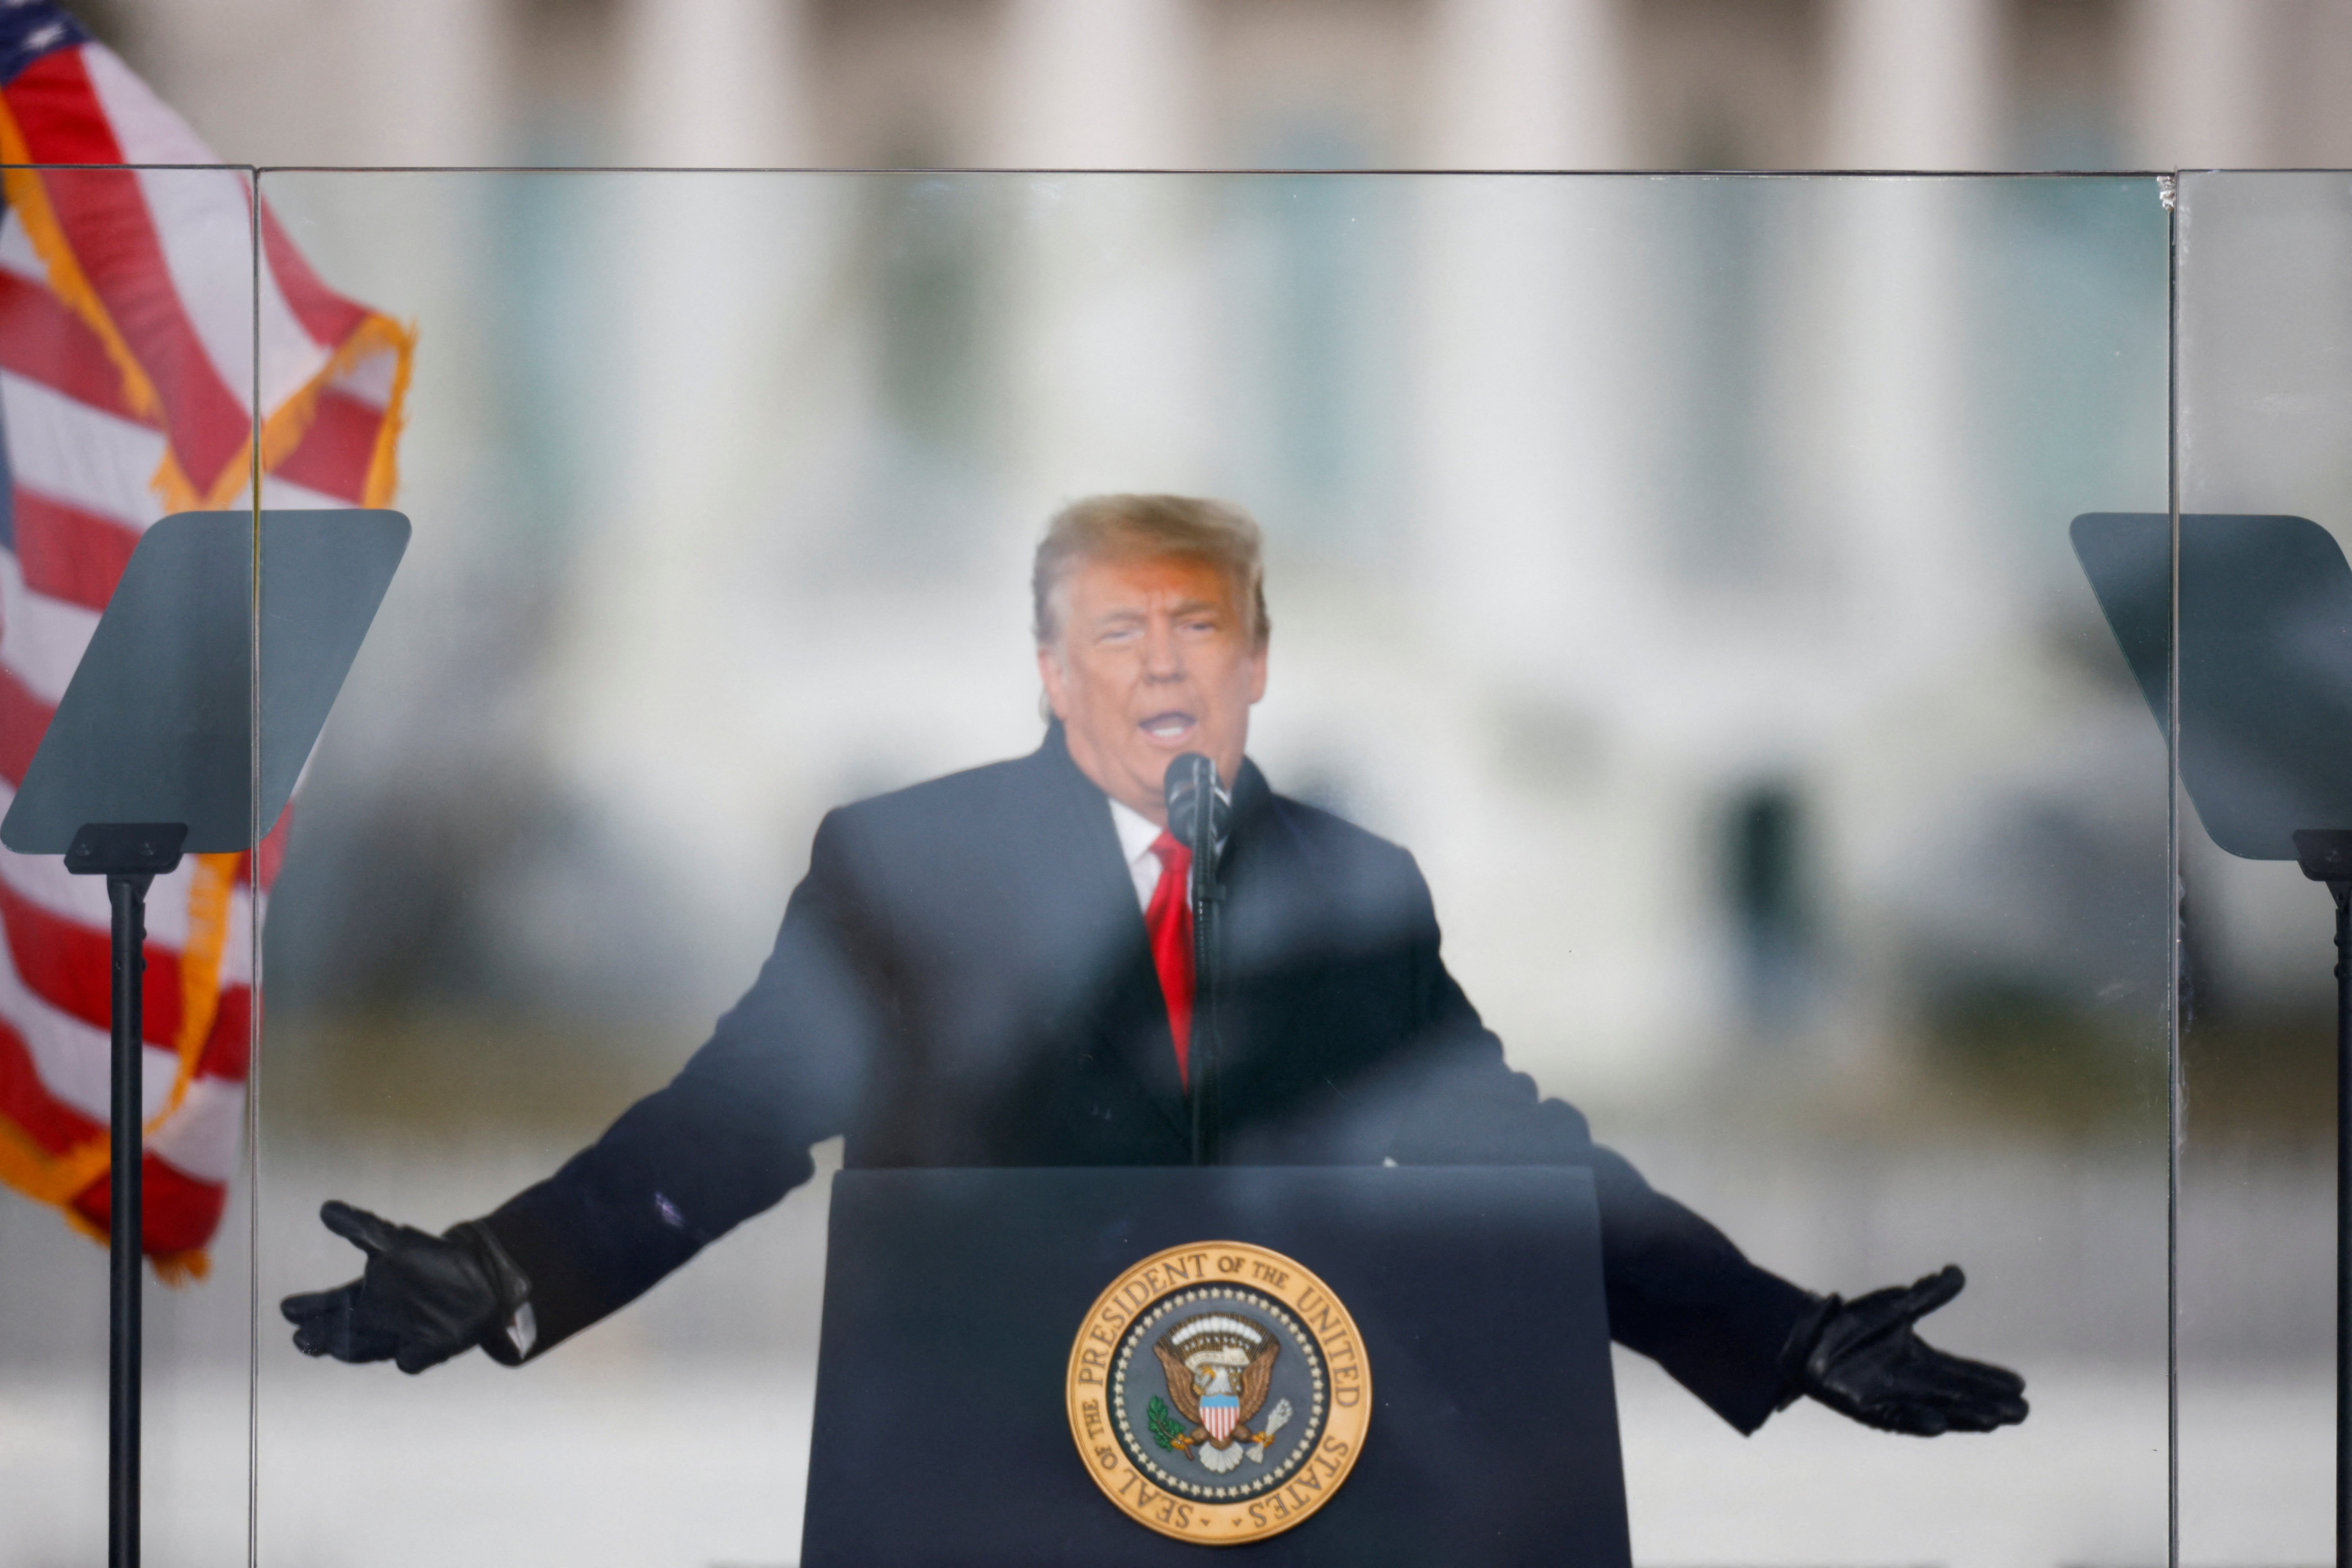 US president Donald Trump gestures as he speaks during a rally on January 6 2021